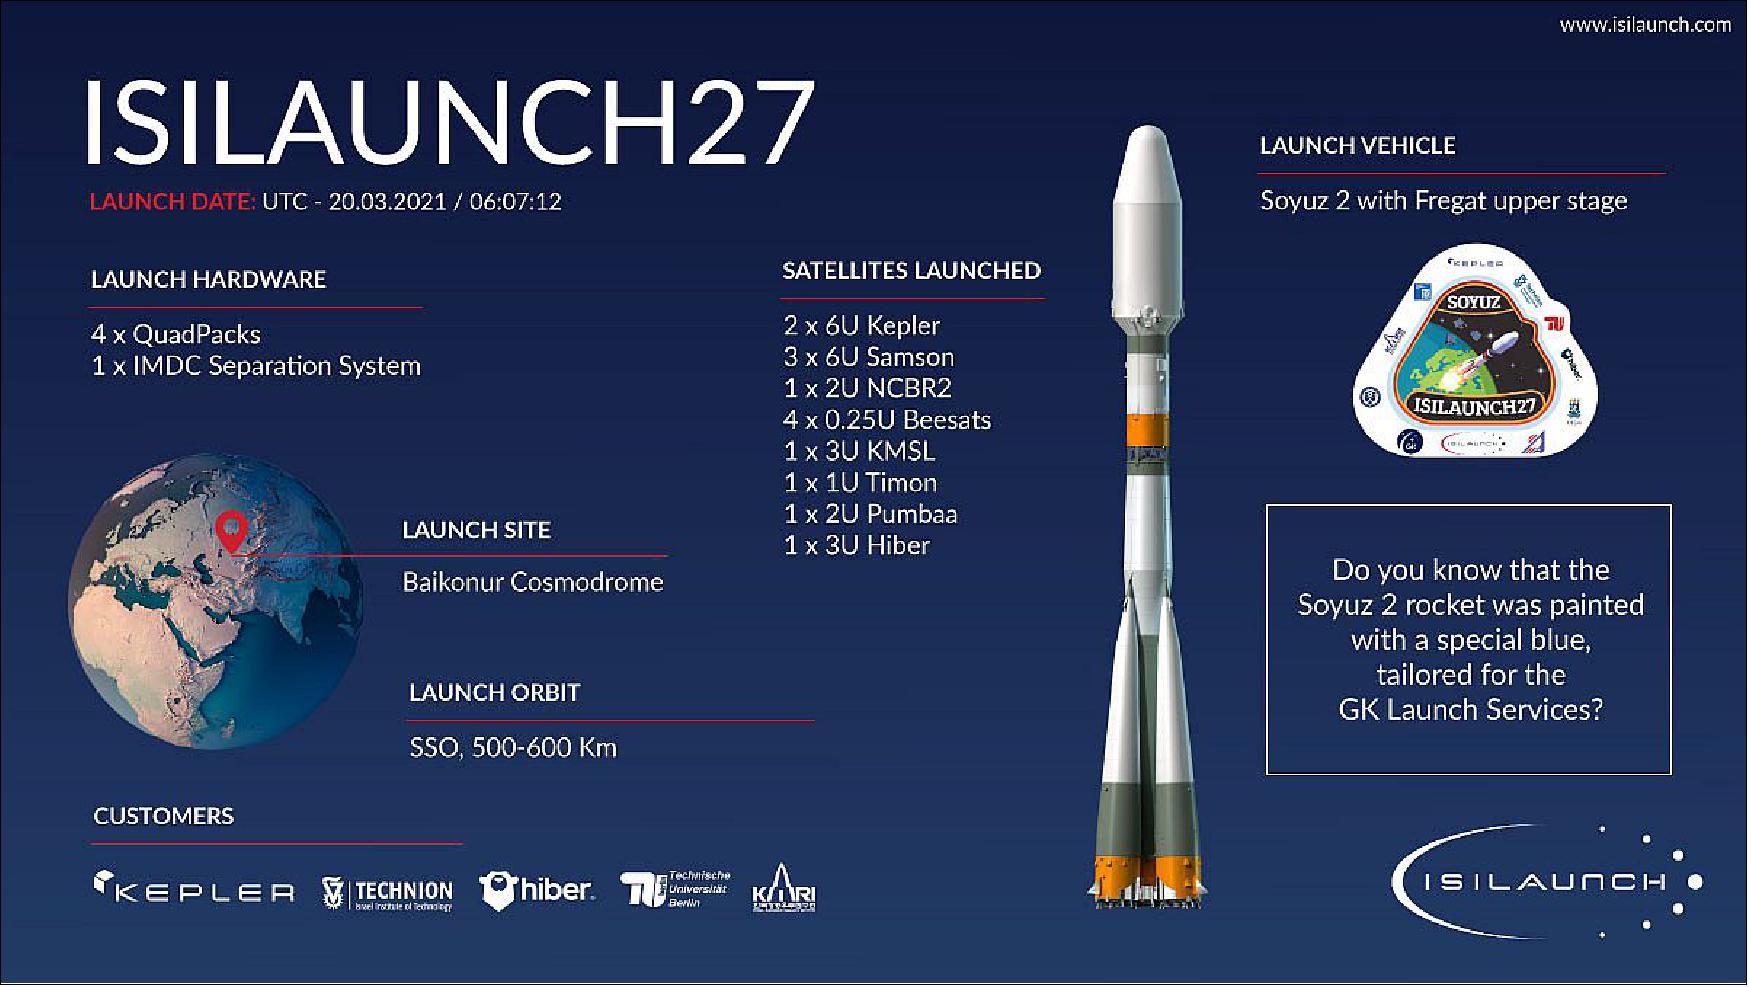 Figure 15: Poster of the ISILAUNCH27 launch campaign (image credit: ISILAUNCH)